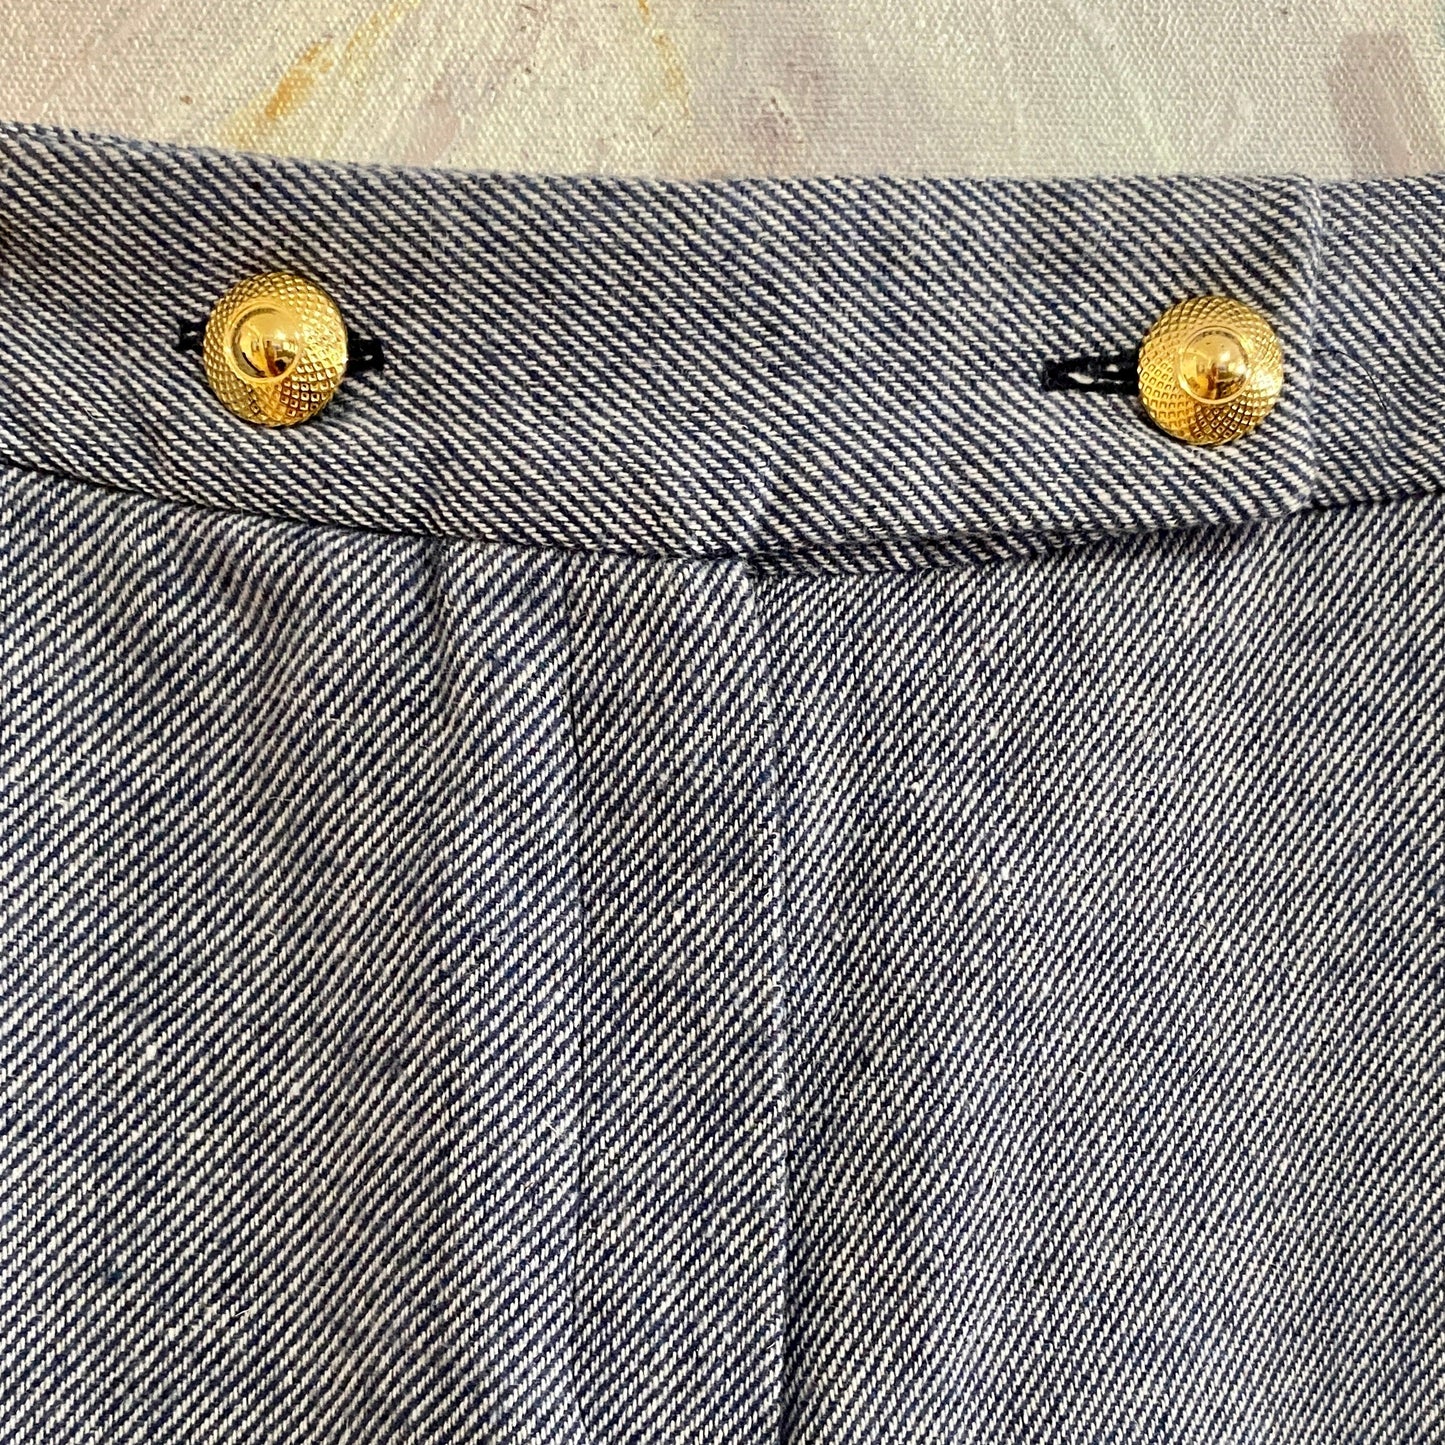 May Trousers in Blue